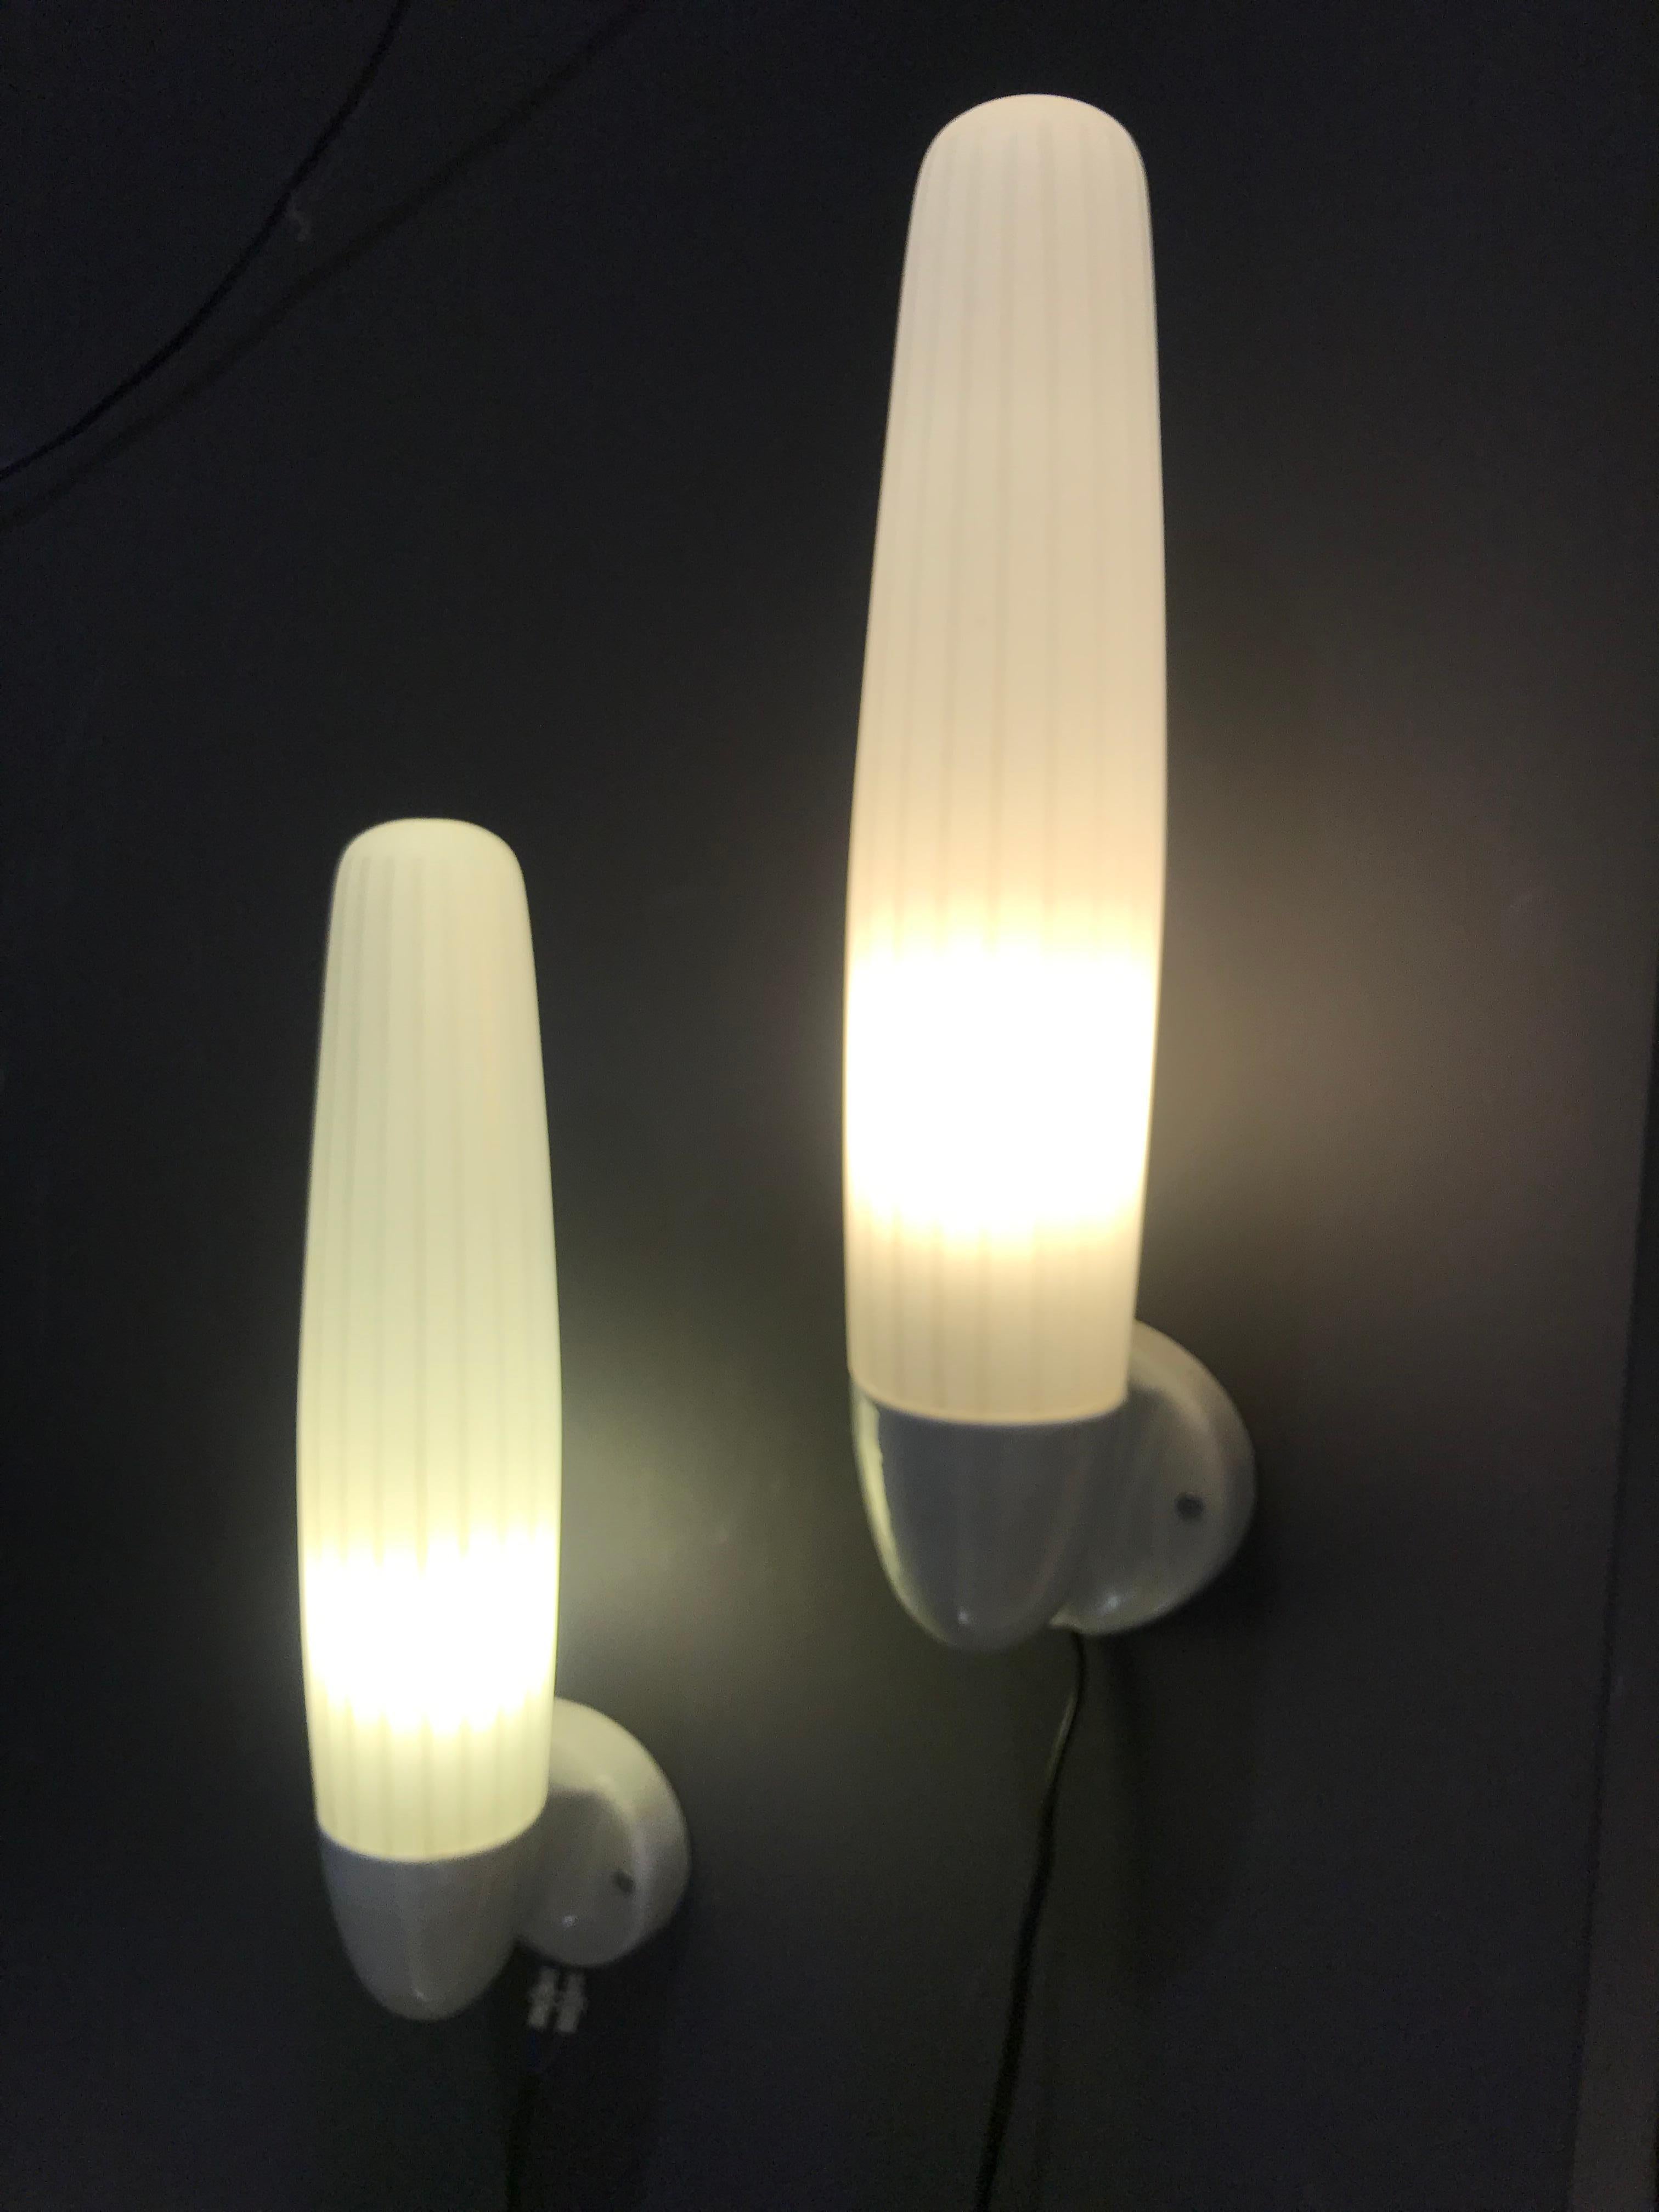 Set of 2 large midcentury wall lamps by Wilhelm Wagenfeld. Manufactured by Lidner in West-Germany late 1950s, begin 1960s. In good working condition.